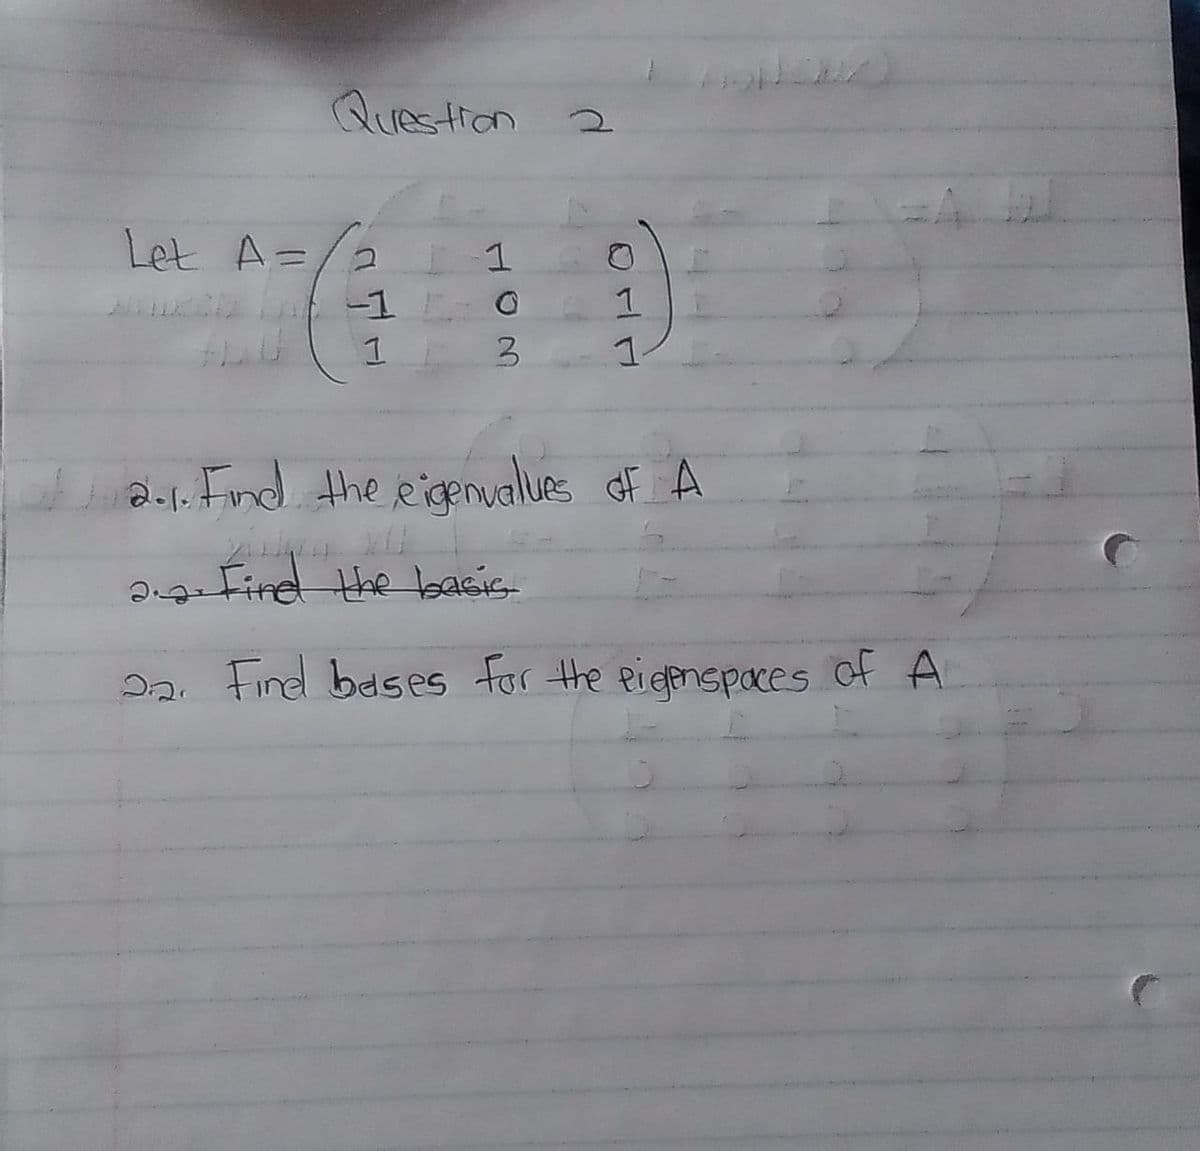 Question 2
Let A=
1
-1
1.
1
2. Find the eigenualues of A
2 Fire the basis
22. Find bases for the pieenspaces of A
